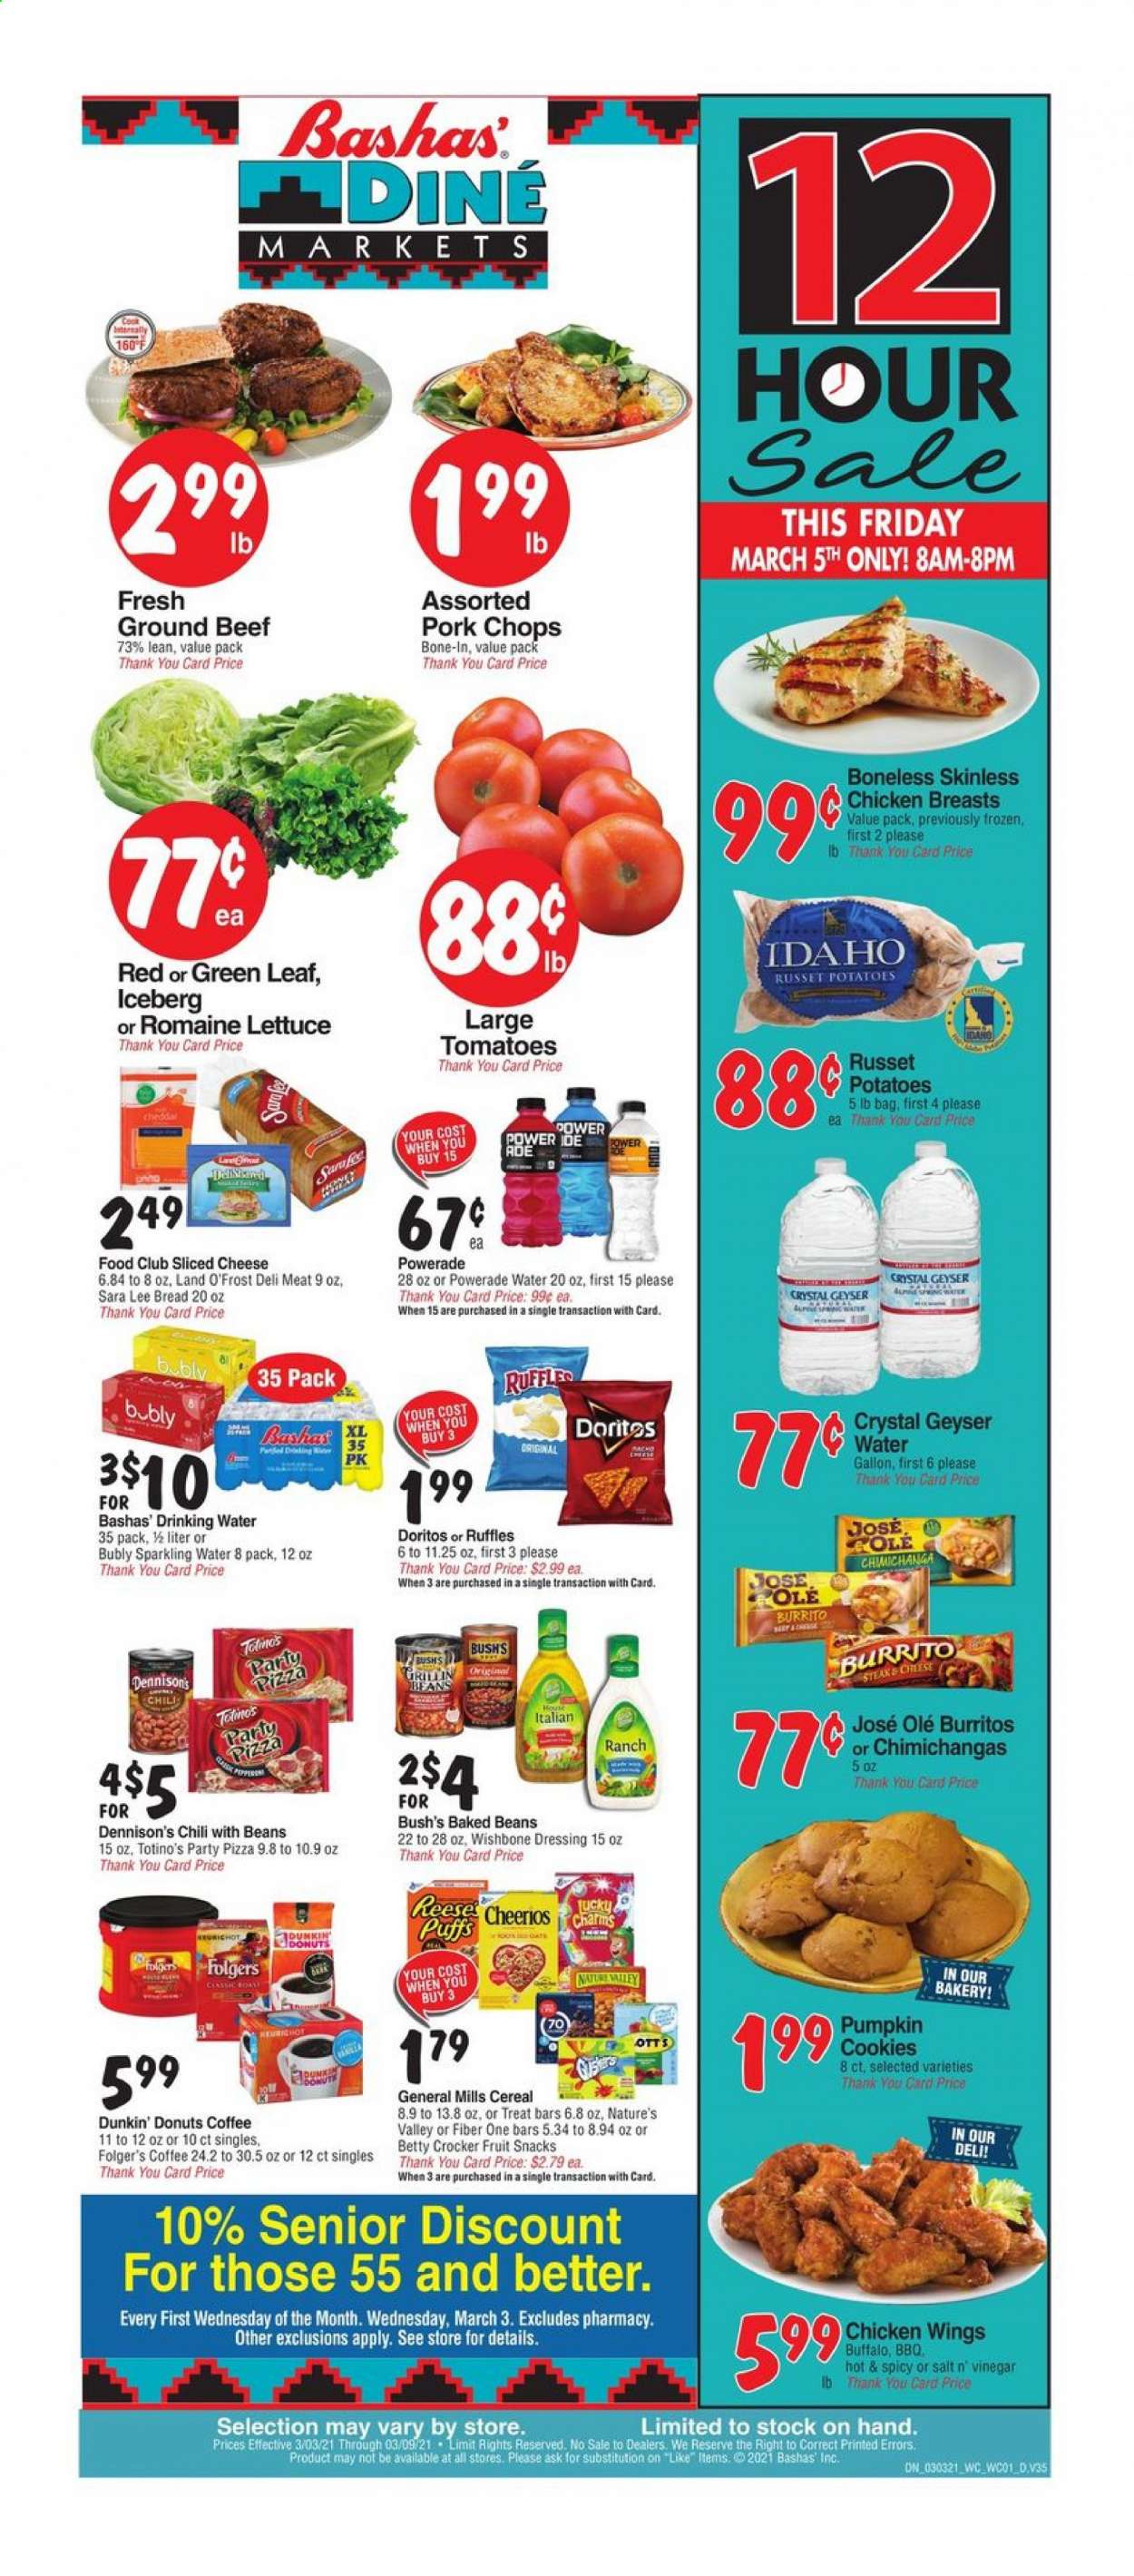 thumbnail - Bashas' Diné Markets Flyer - 03/03/2021 - 03/09/2021 - Sales products - lettuce, bread, Sara Lee, puffs, donut, Dunkin' Donuts, pizza, burrito, sliced cheese, cheese, beans, chicken wings, cookies, fruit snack, Doritos, Ruffles, salt, baked beans, cereals, Cheerios, Fiber One, dressing, vinegar, Powerade, sparkling water, coffee, Folgers, chicken breasts, beef meat, ground beef, steak, pork chops, pork meat. Page 1.